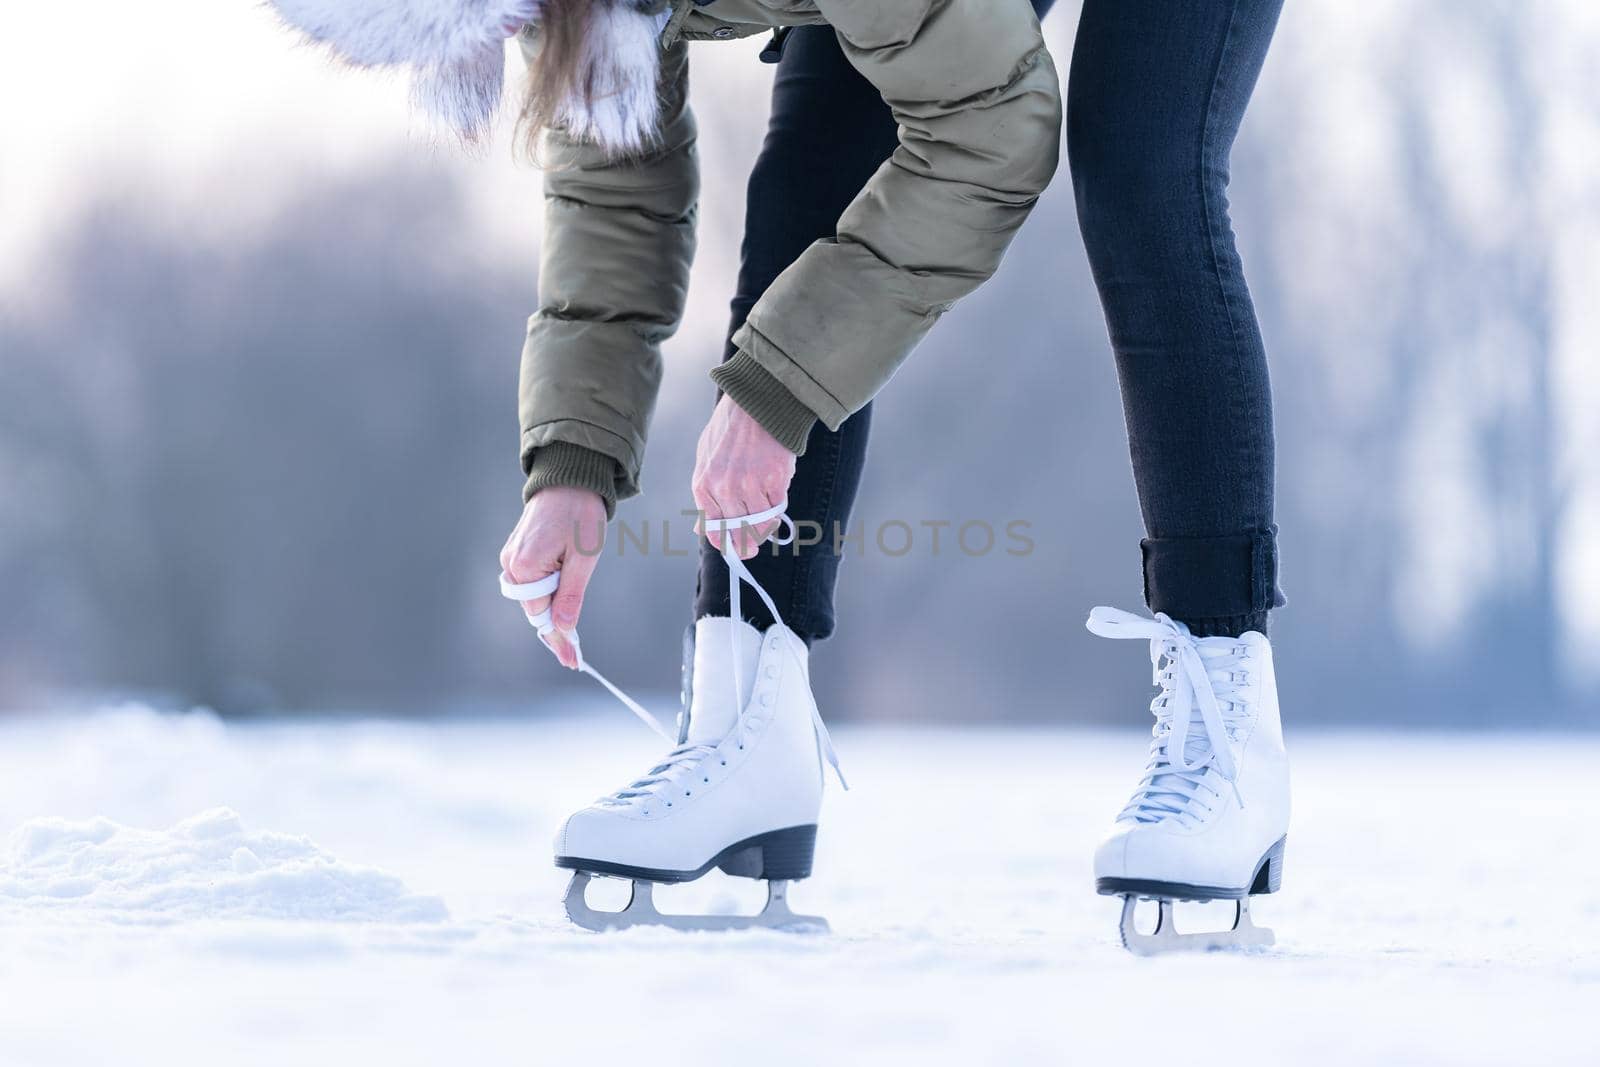 tying the laces of winter skates on a frozen lake, ice skating by Edophoto